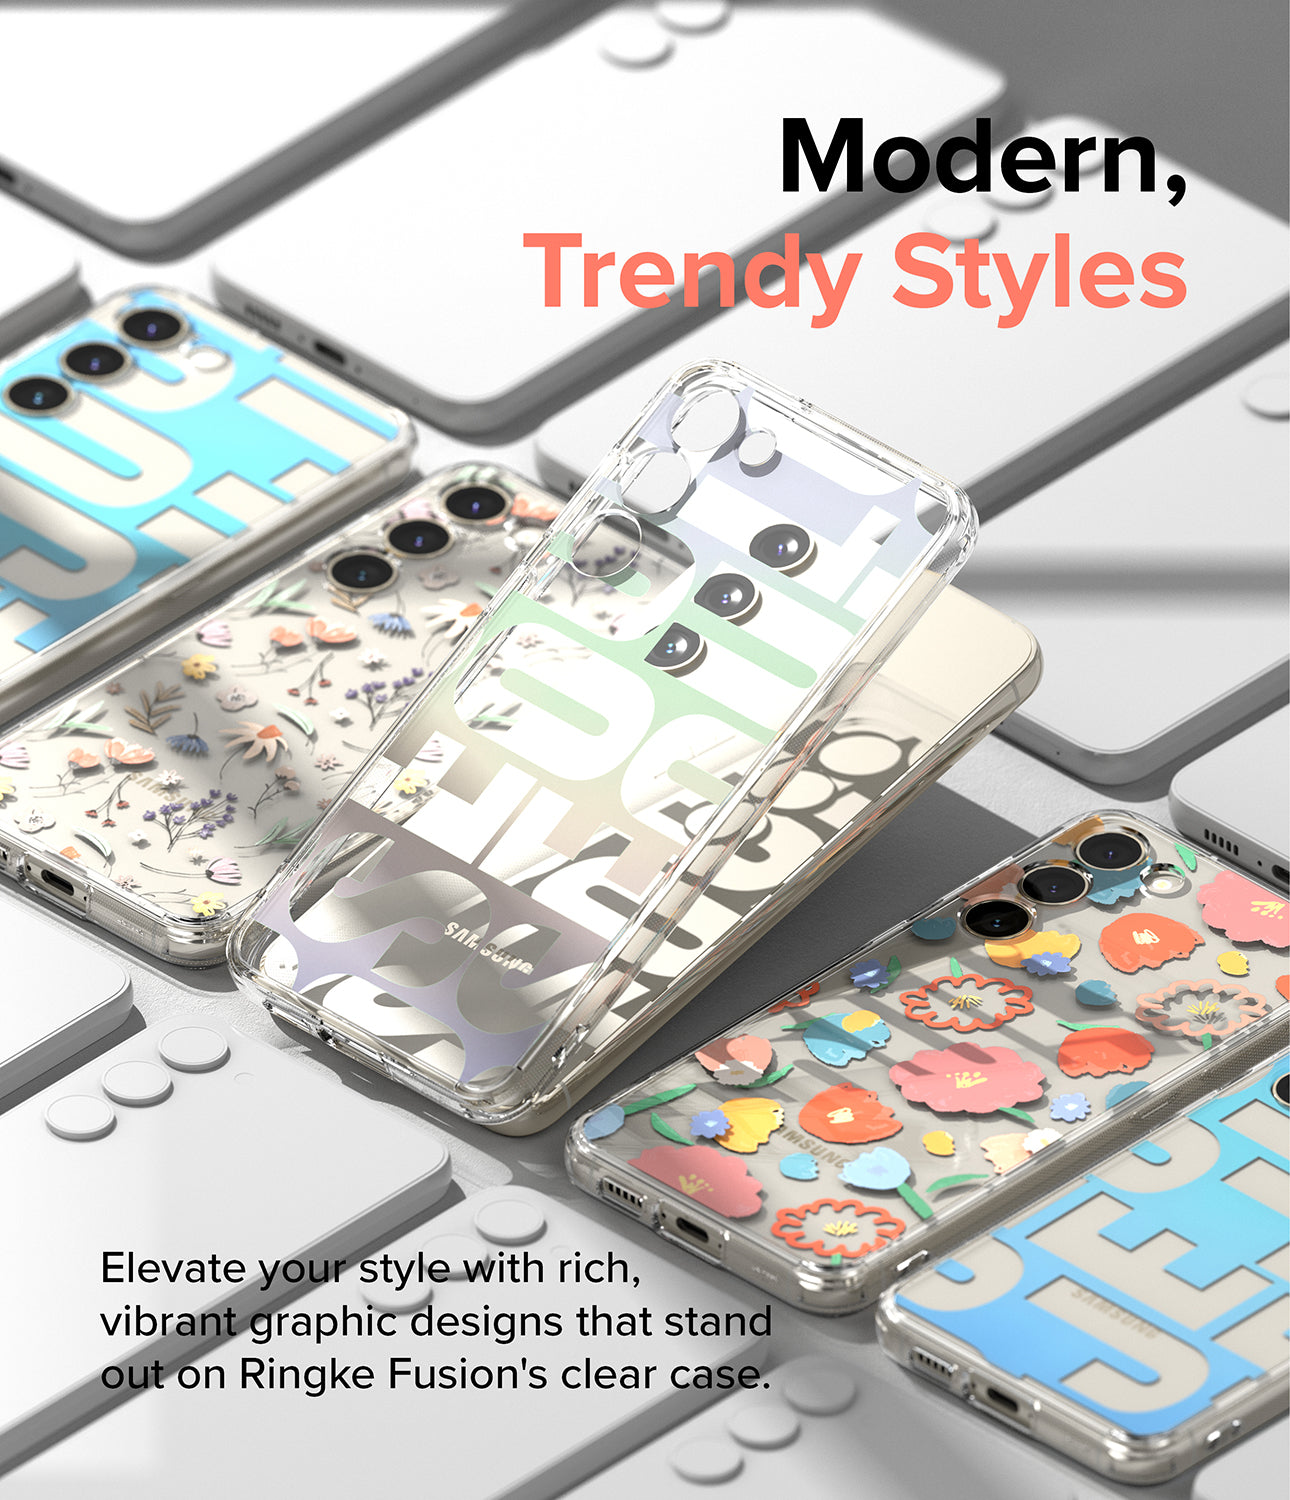 Galaxy S23 Plus Case | Fusion Design Floral - Modern, Trendy Styles.